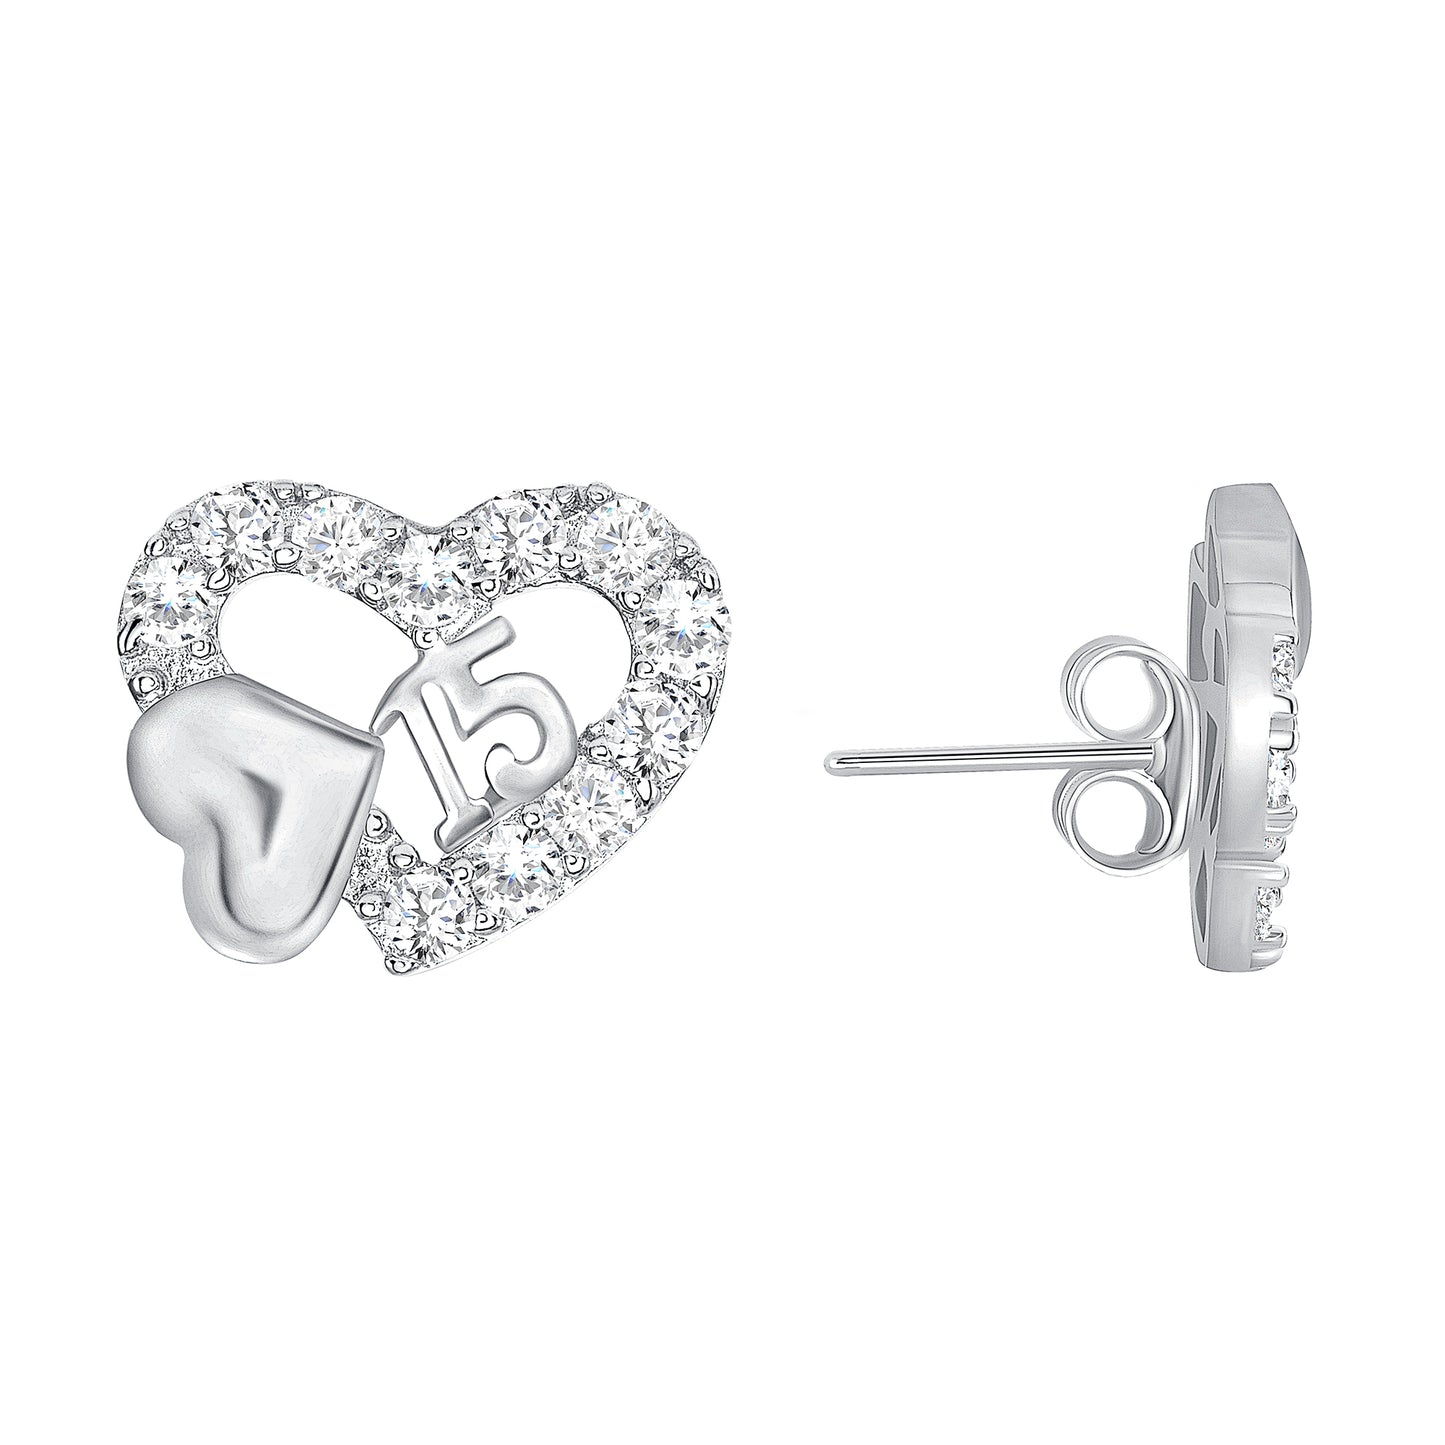 Silver 925 Rhodium Plated 2 Hearts 15 Years Cubic Zirconia Set PS0041C1